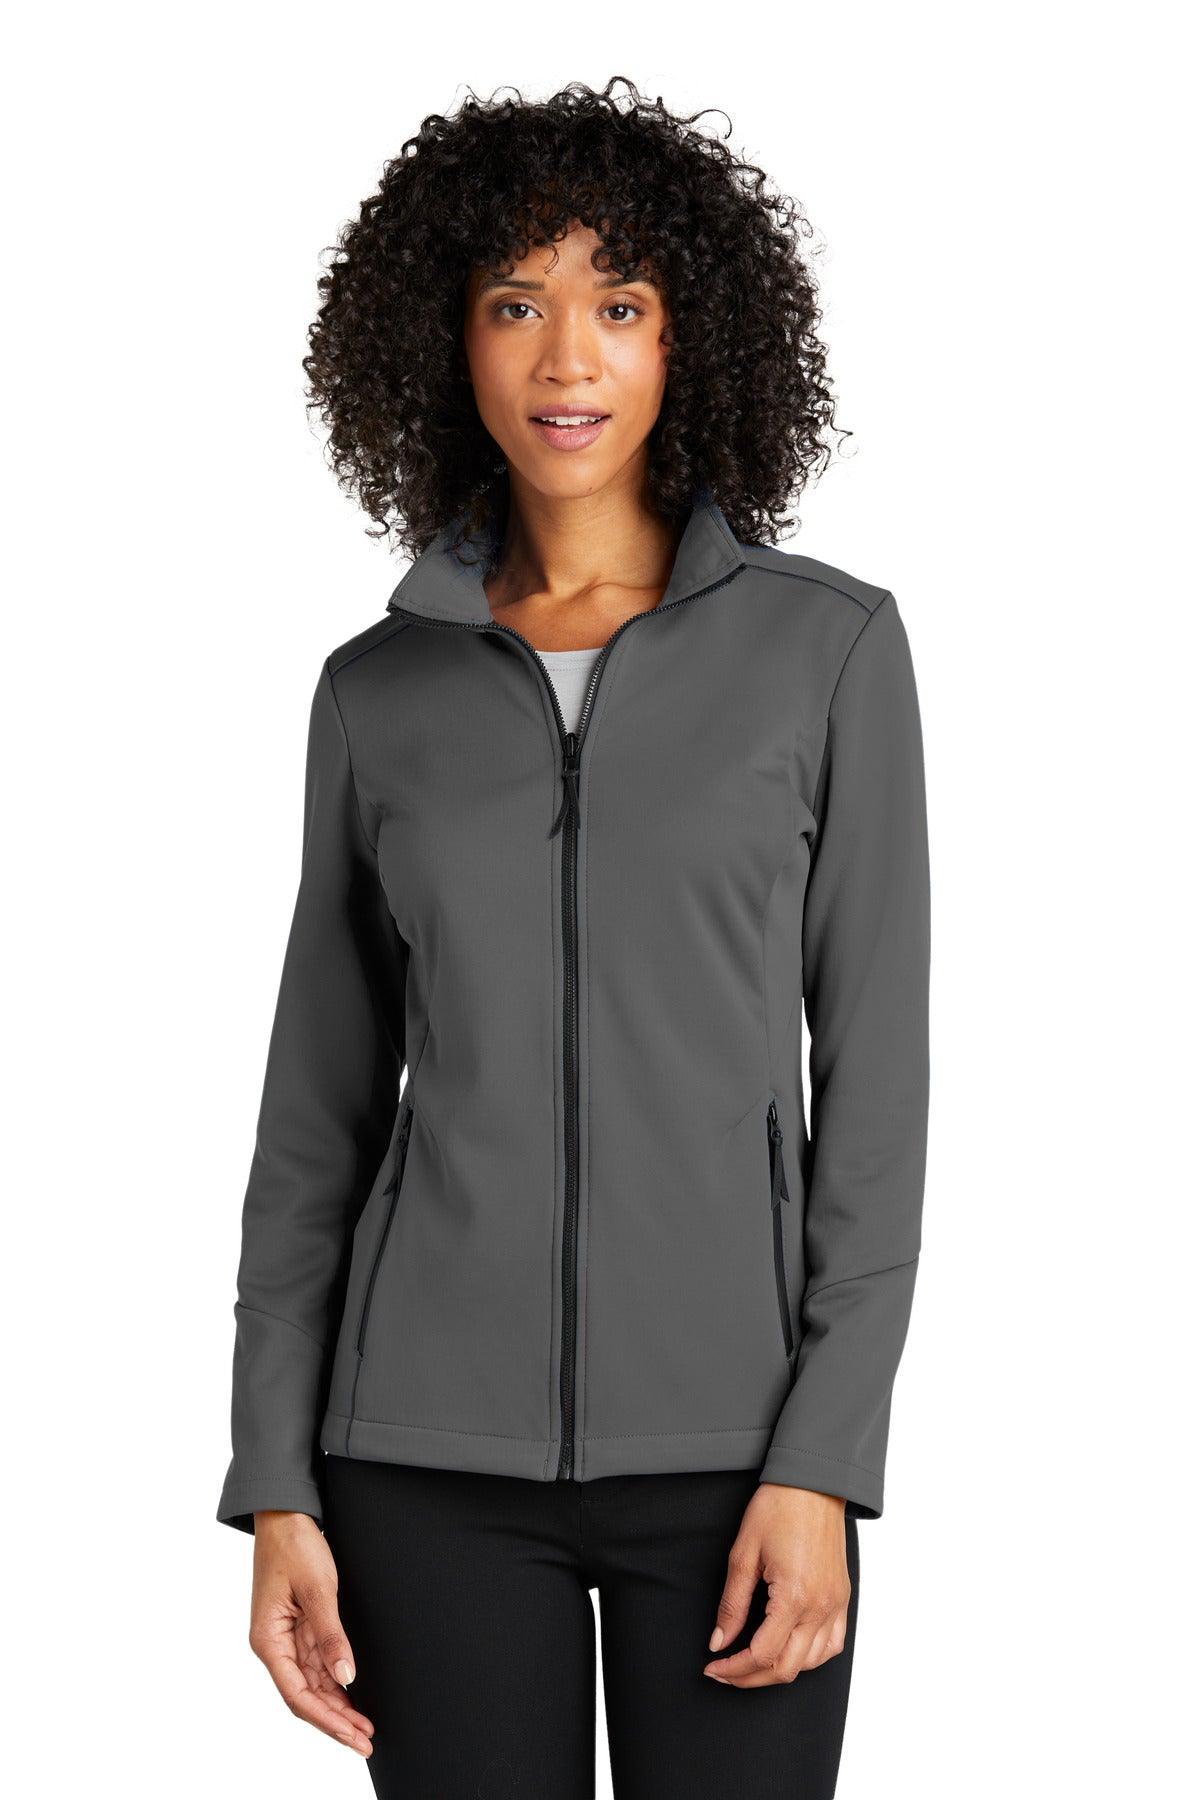 Port Authority Ladies Collective Tech Soft Shell Jacket L921 - Dresses Max